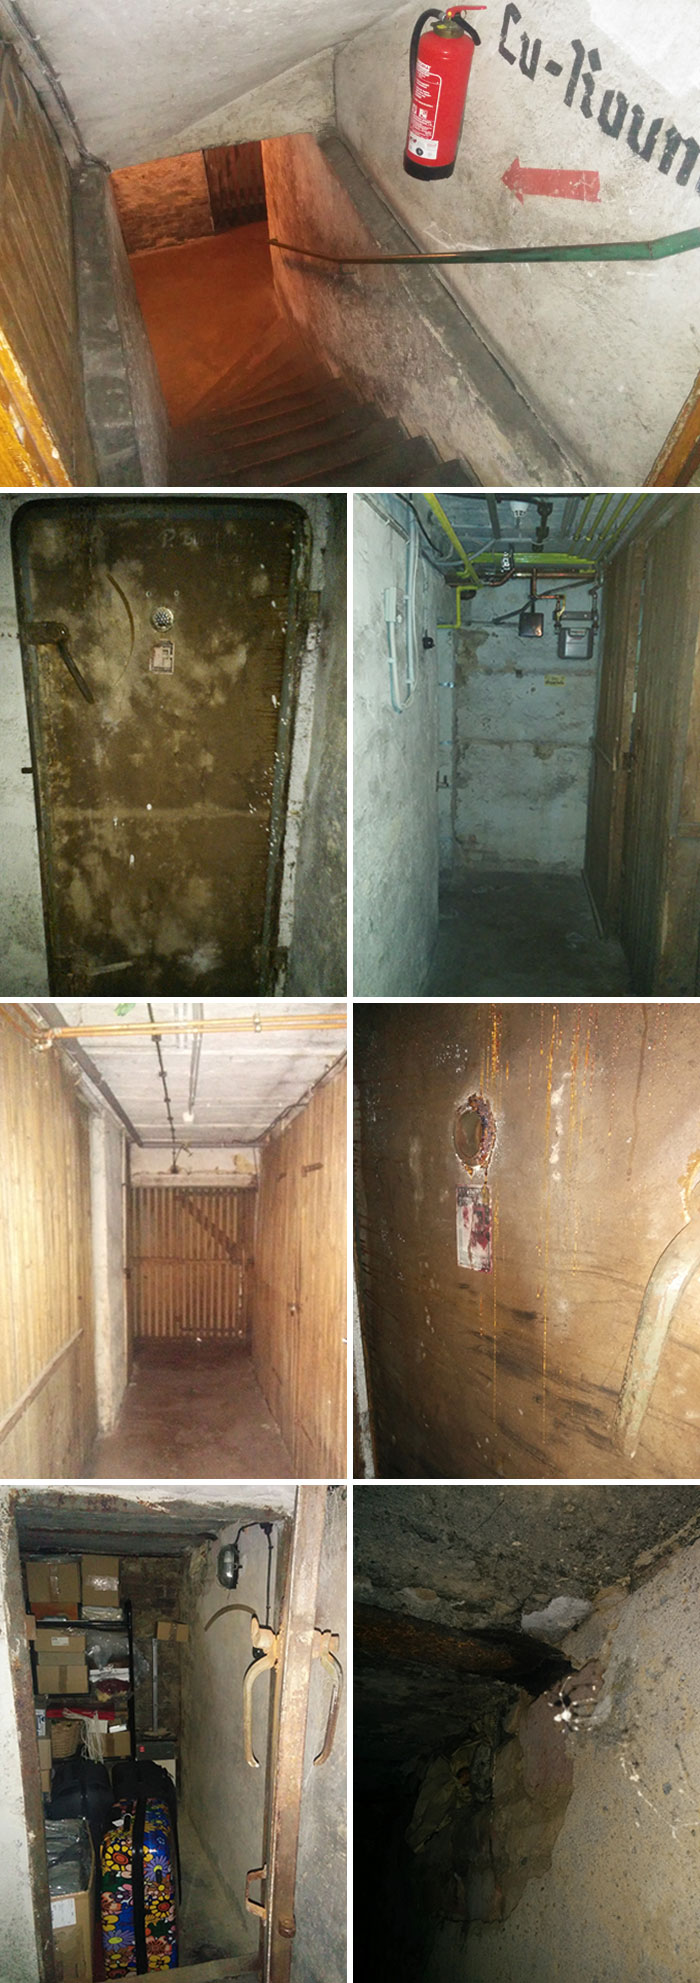 I Discovered A Bunker In The Basement Of The House I Live In